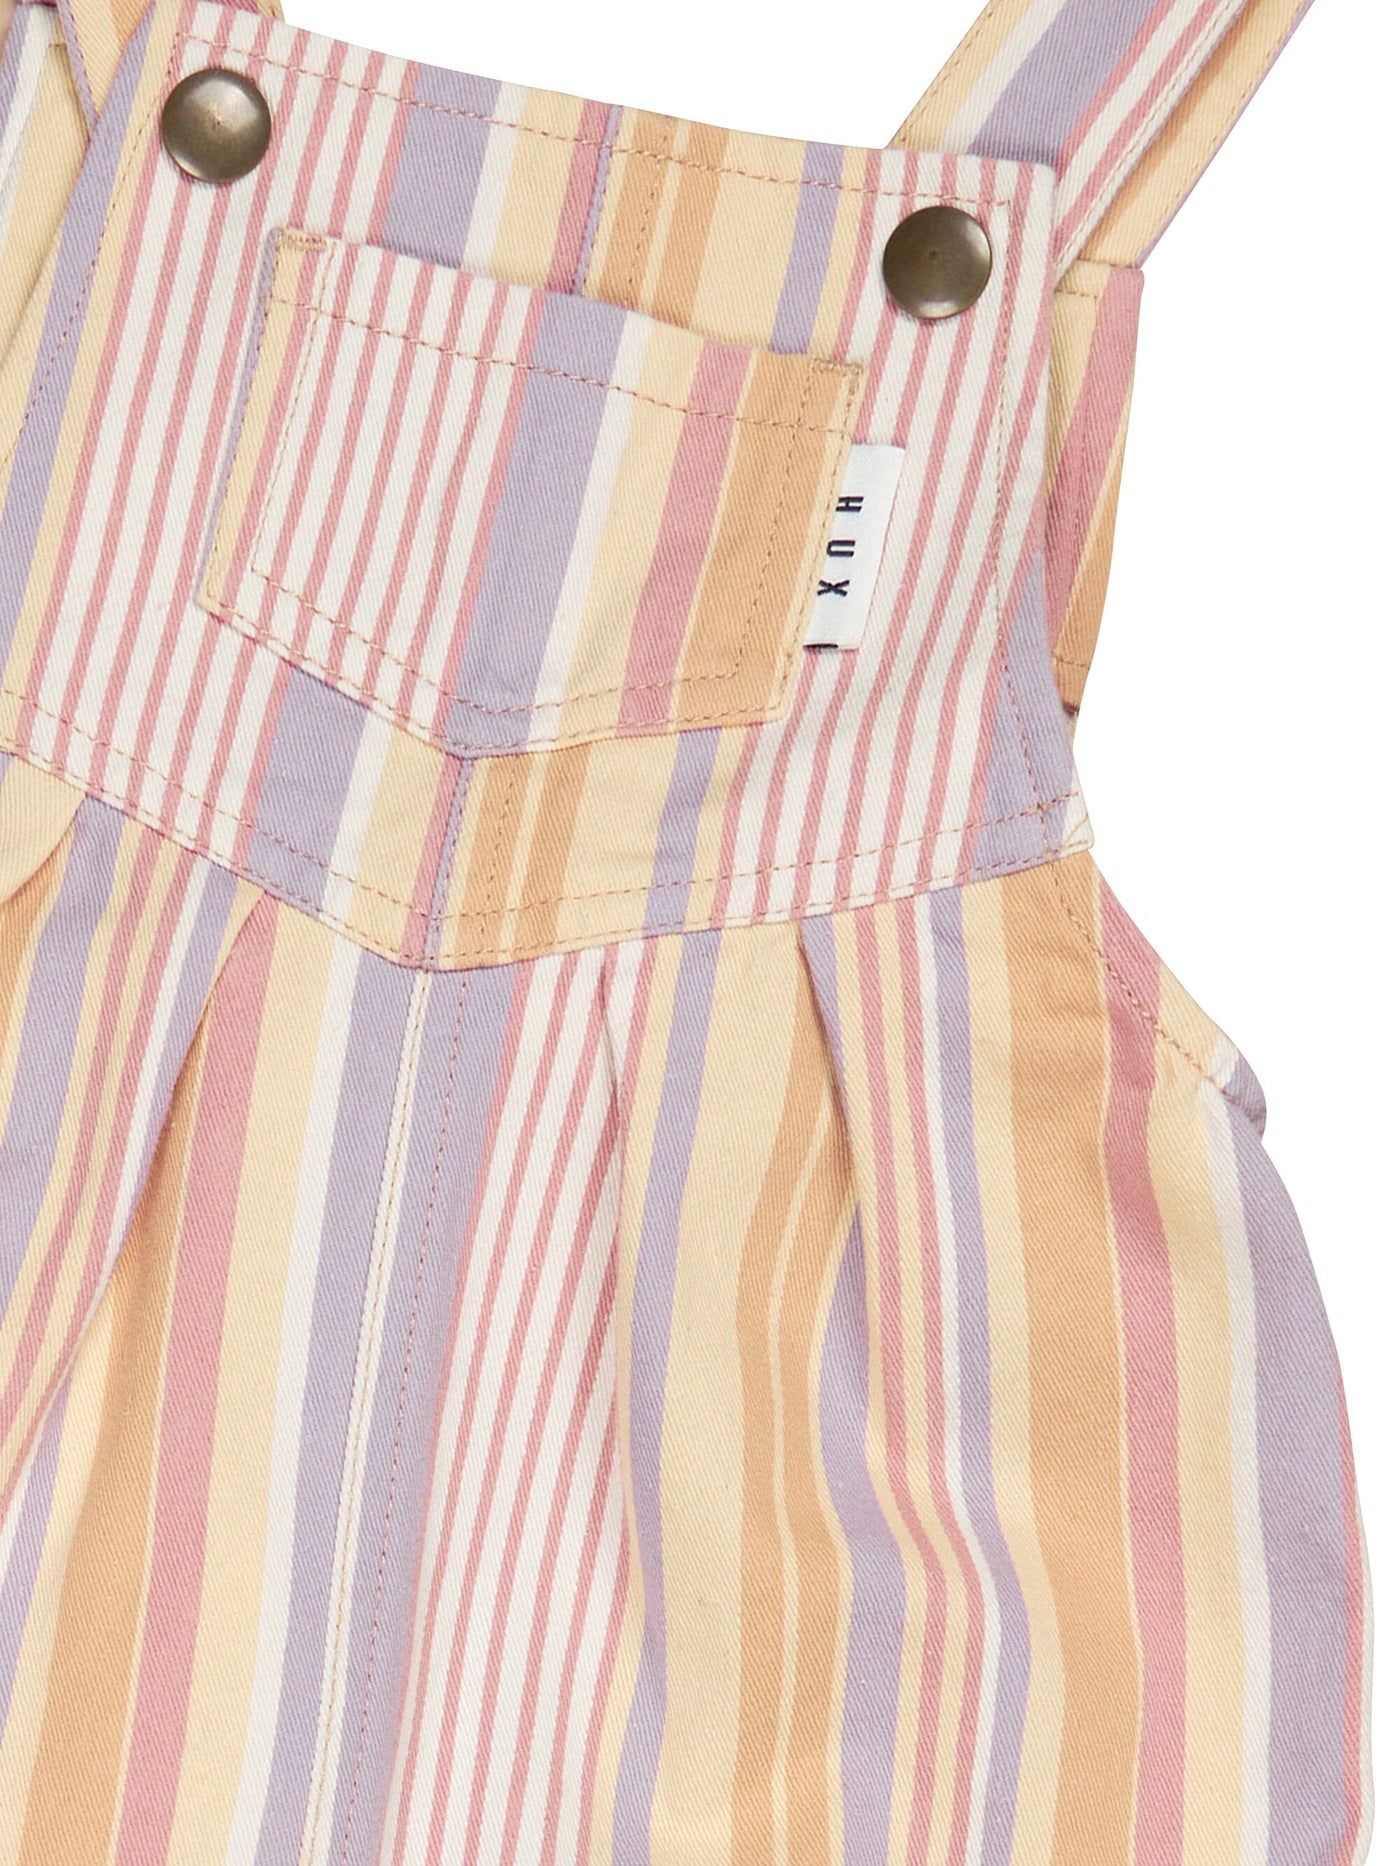 Huxbaby Vintage Stripe Overalls HB015S23 Overalls Huxbaby 